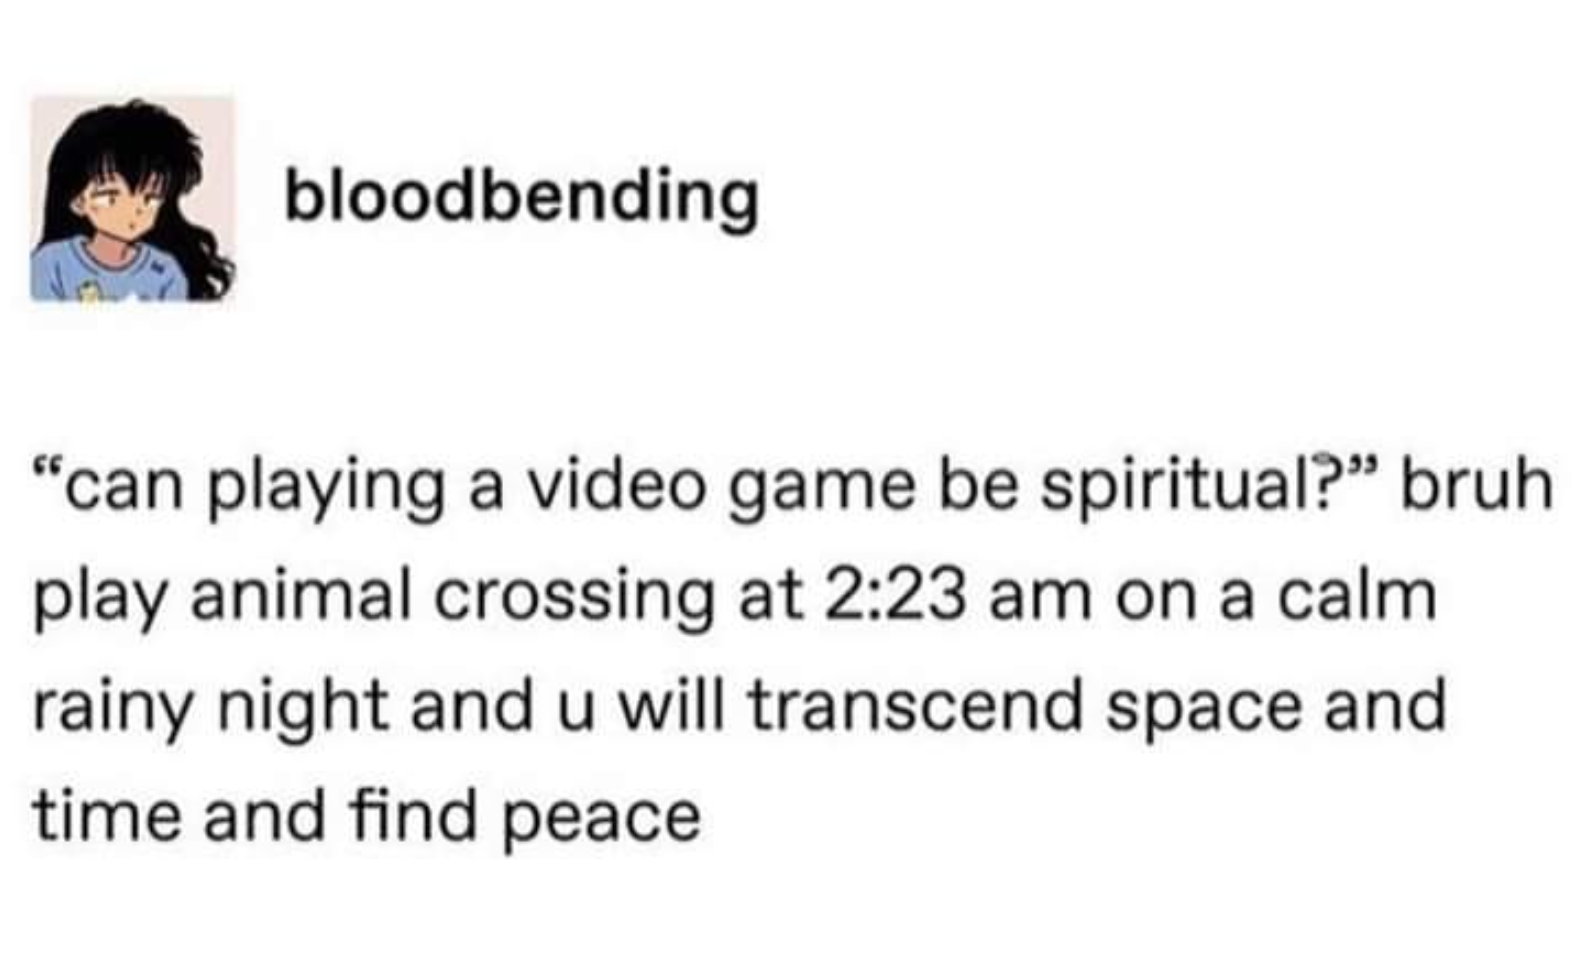 smile - bloodbending "can playing a video game be spiritual?" bruh play animal crossing at on a calm rainy night and u will transcend space and time and find peace